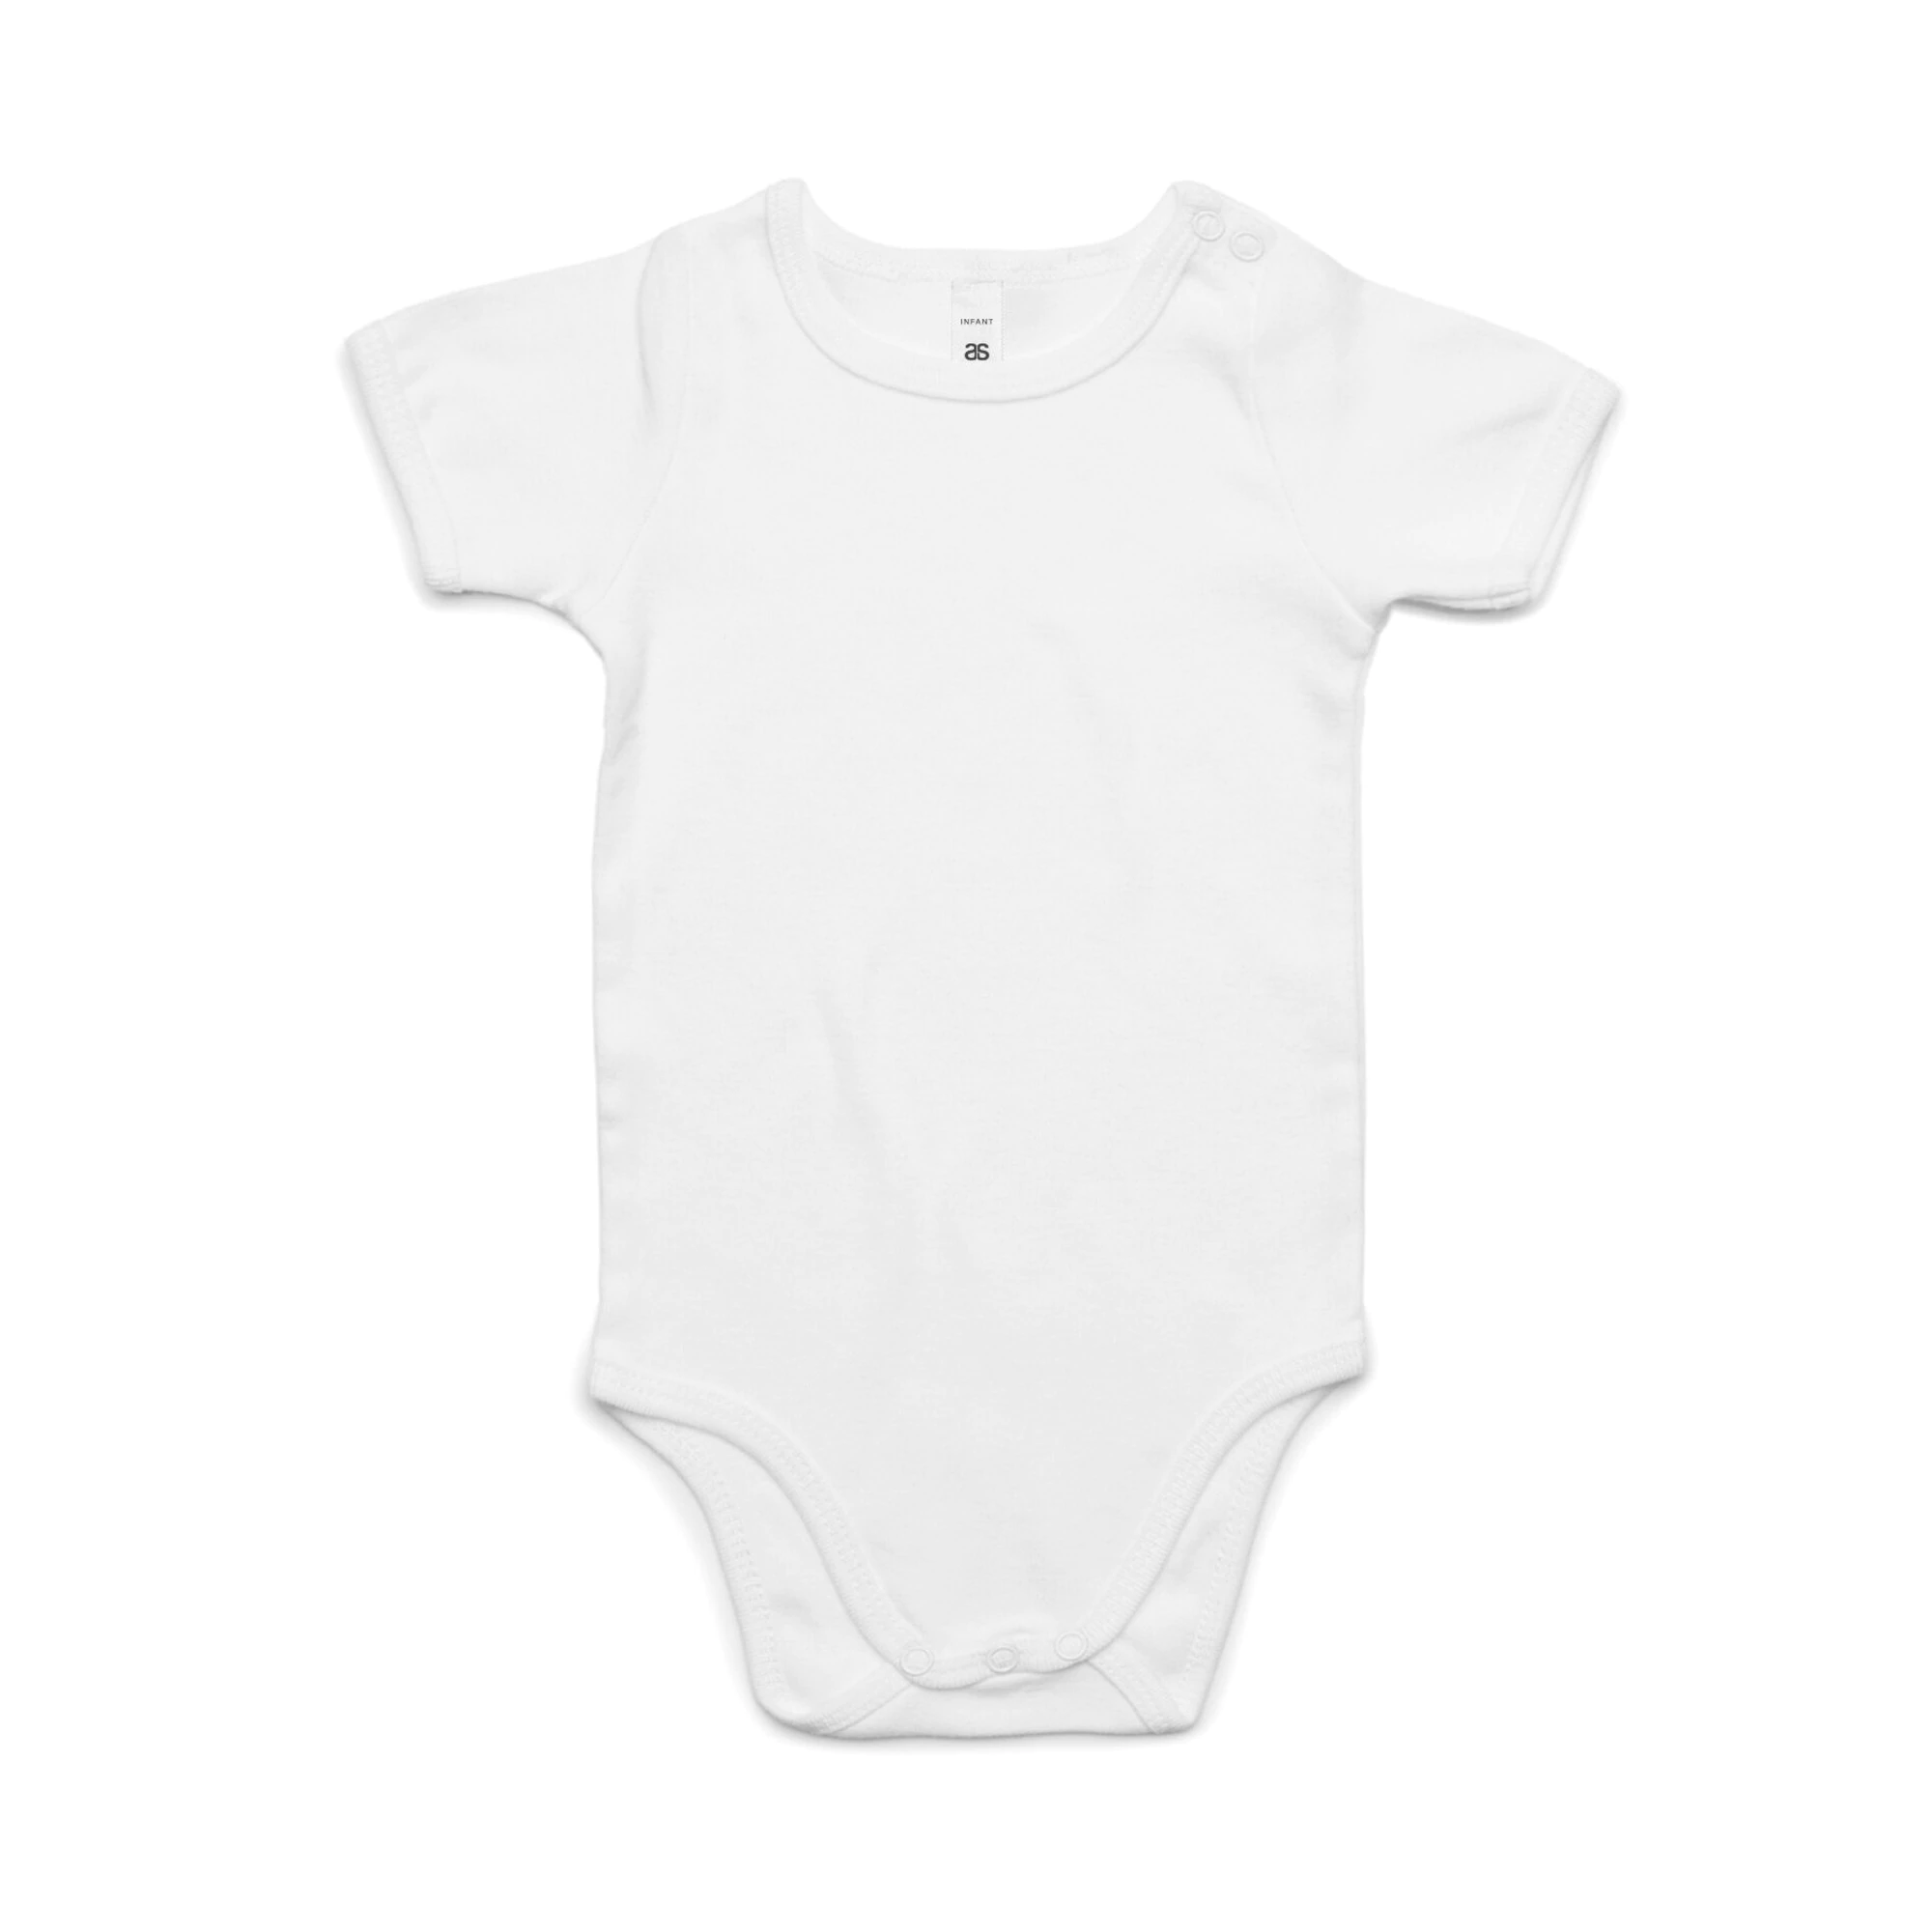 personalised infant mini one piece